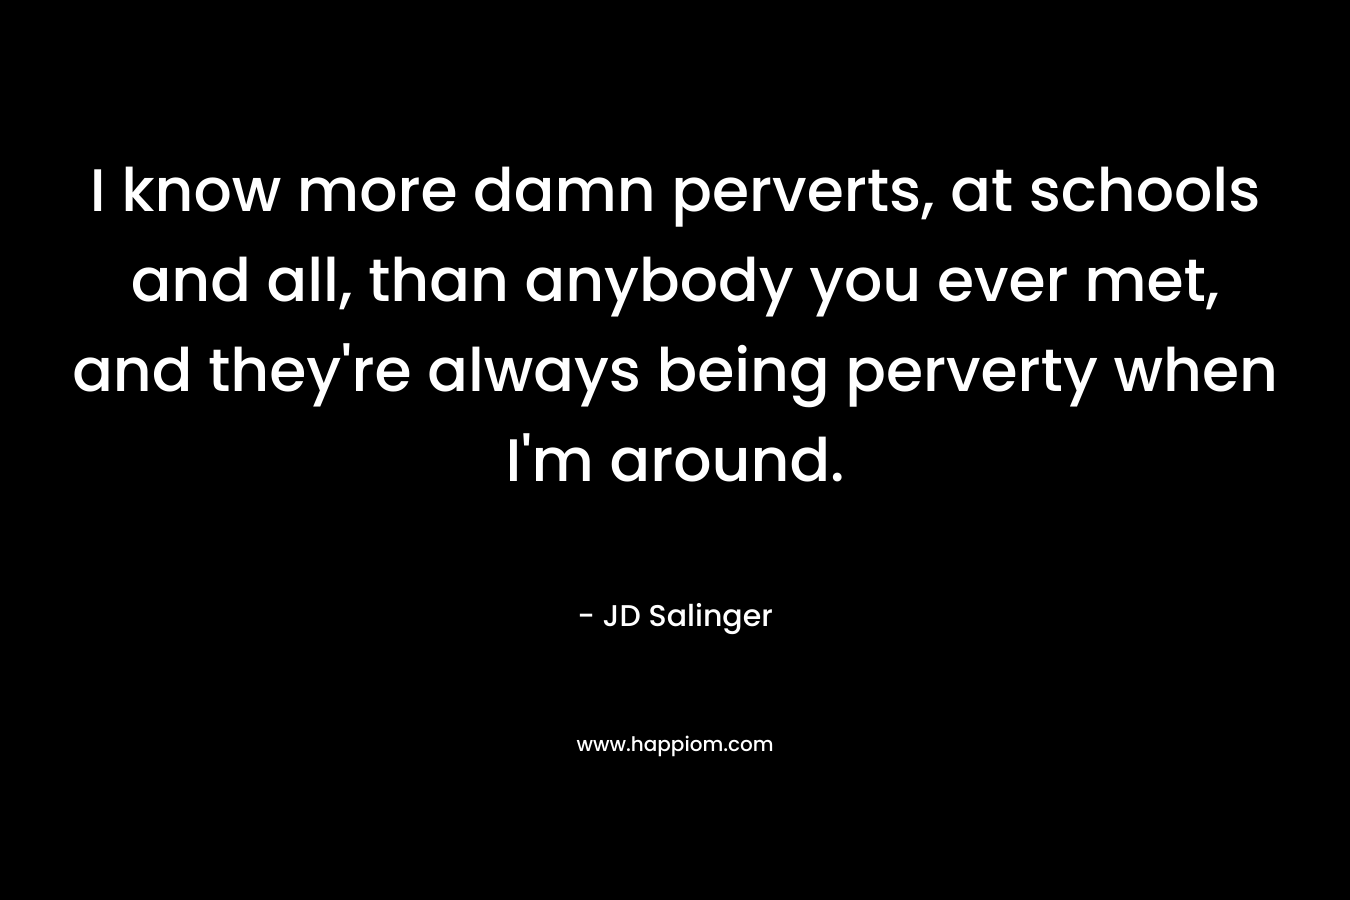 I know more damn perverts, at schools and all, than anybody you ever met, and they're always being perverty when I'm around.